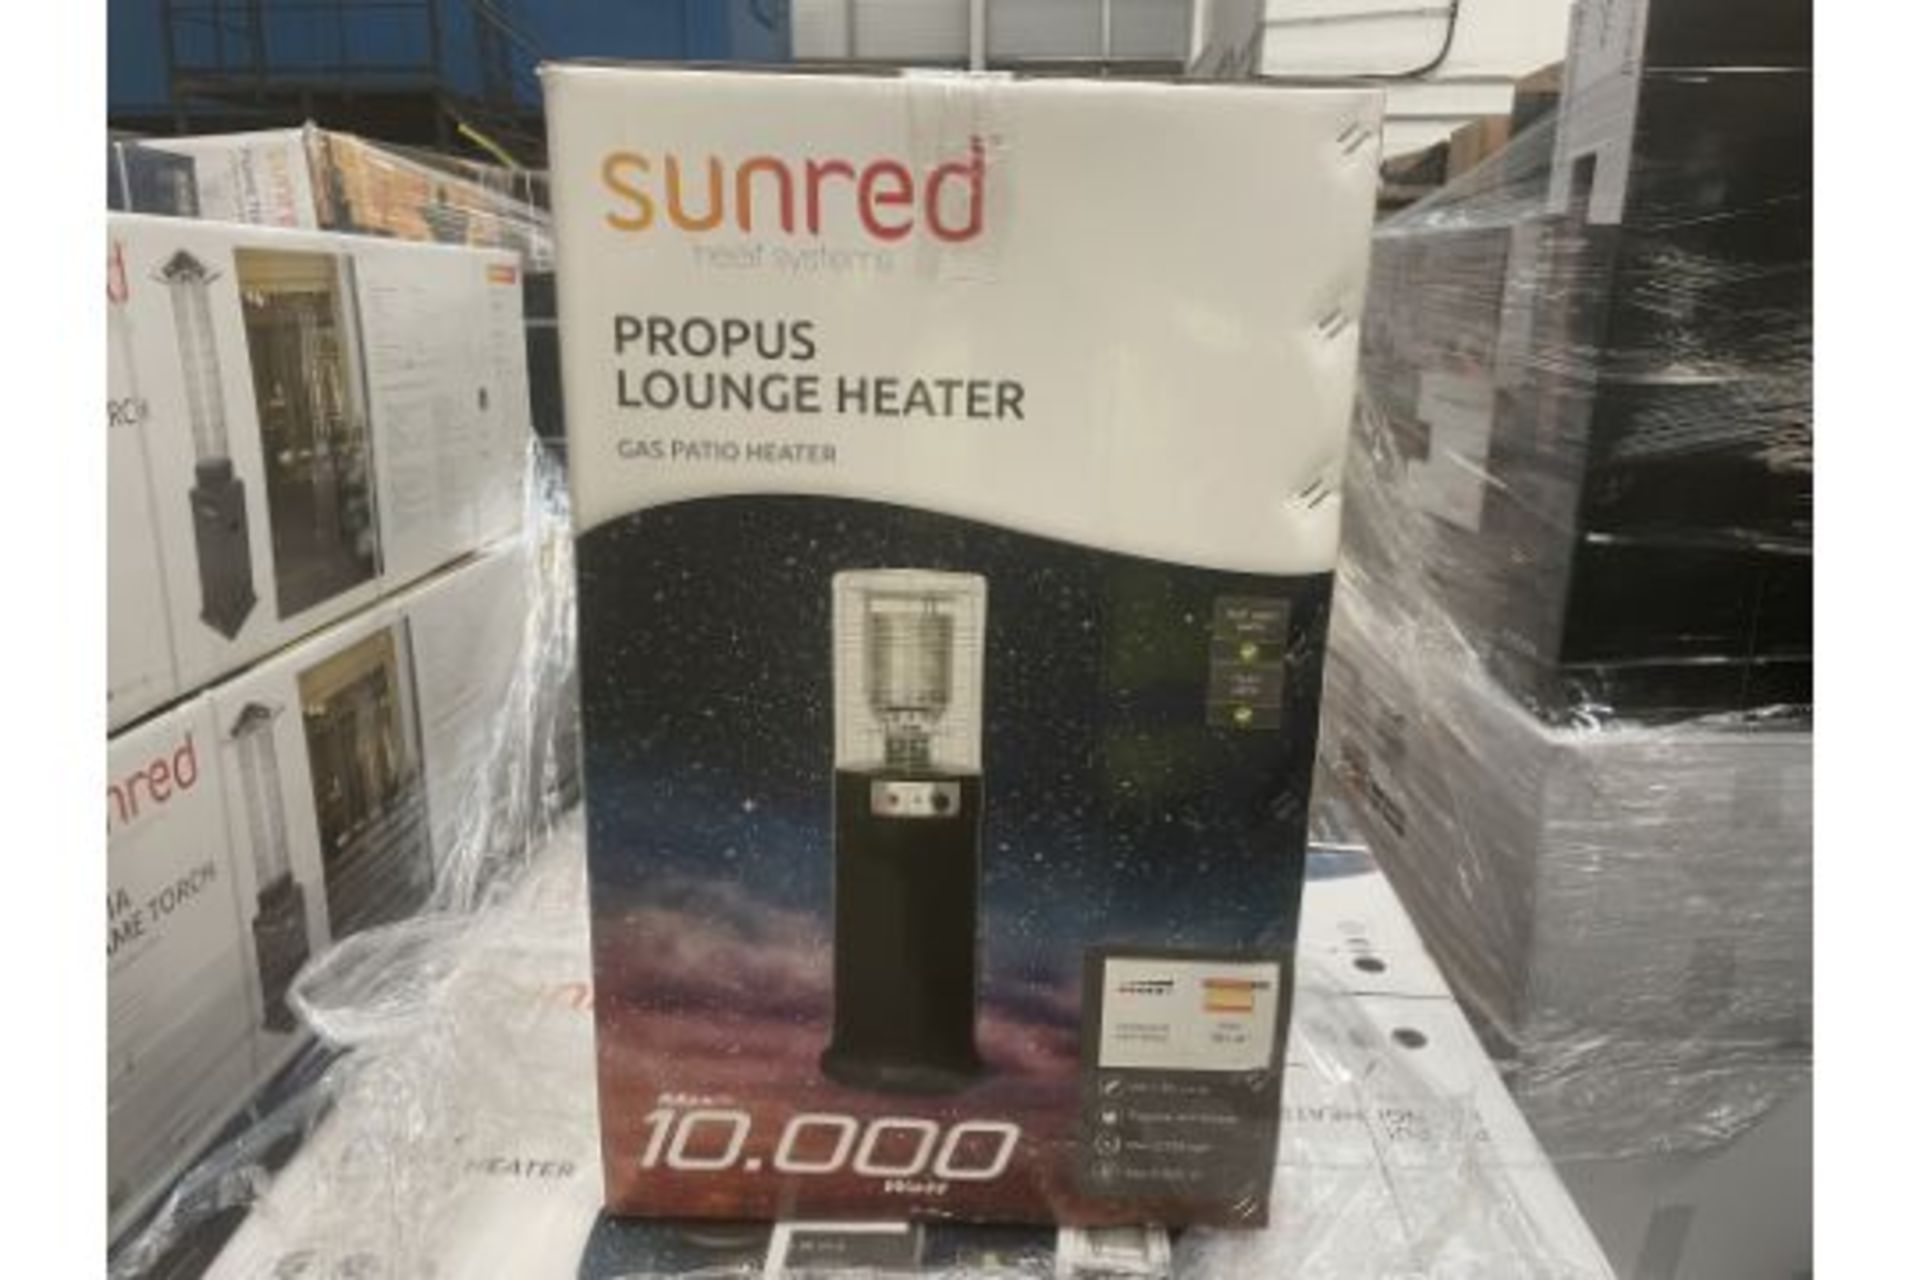 Brand new Sunred LH15G Propus Lounge Heater – Grey RRP £619 Low height unit (135cm tall) – ideal for - Image 3 of 4